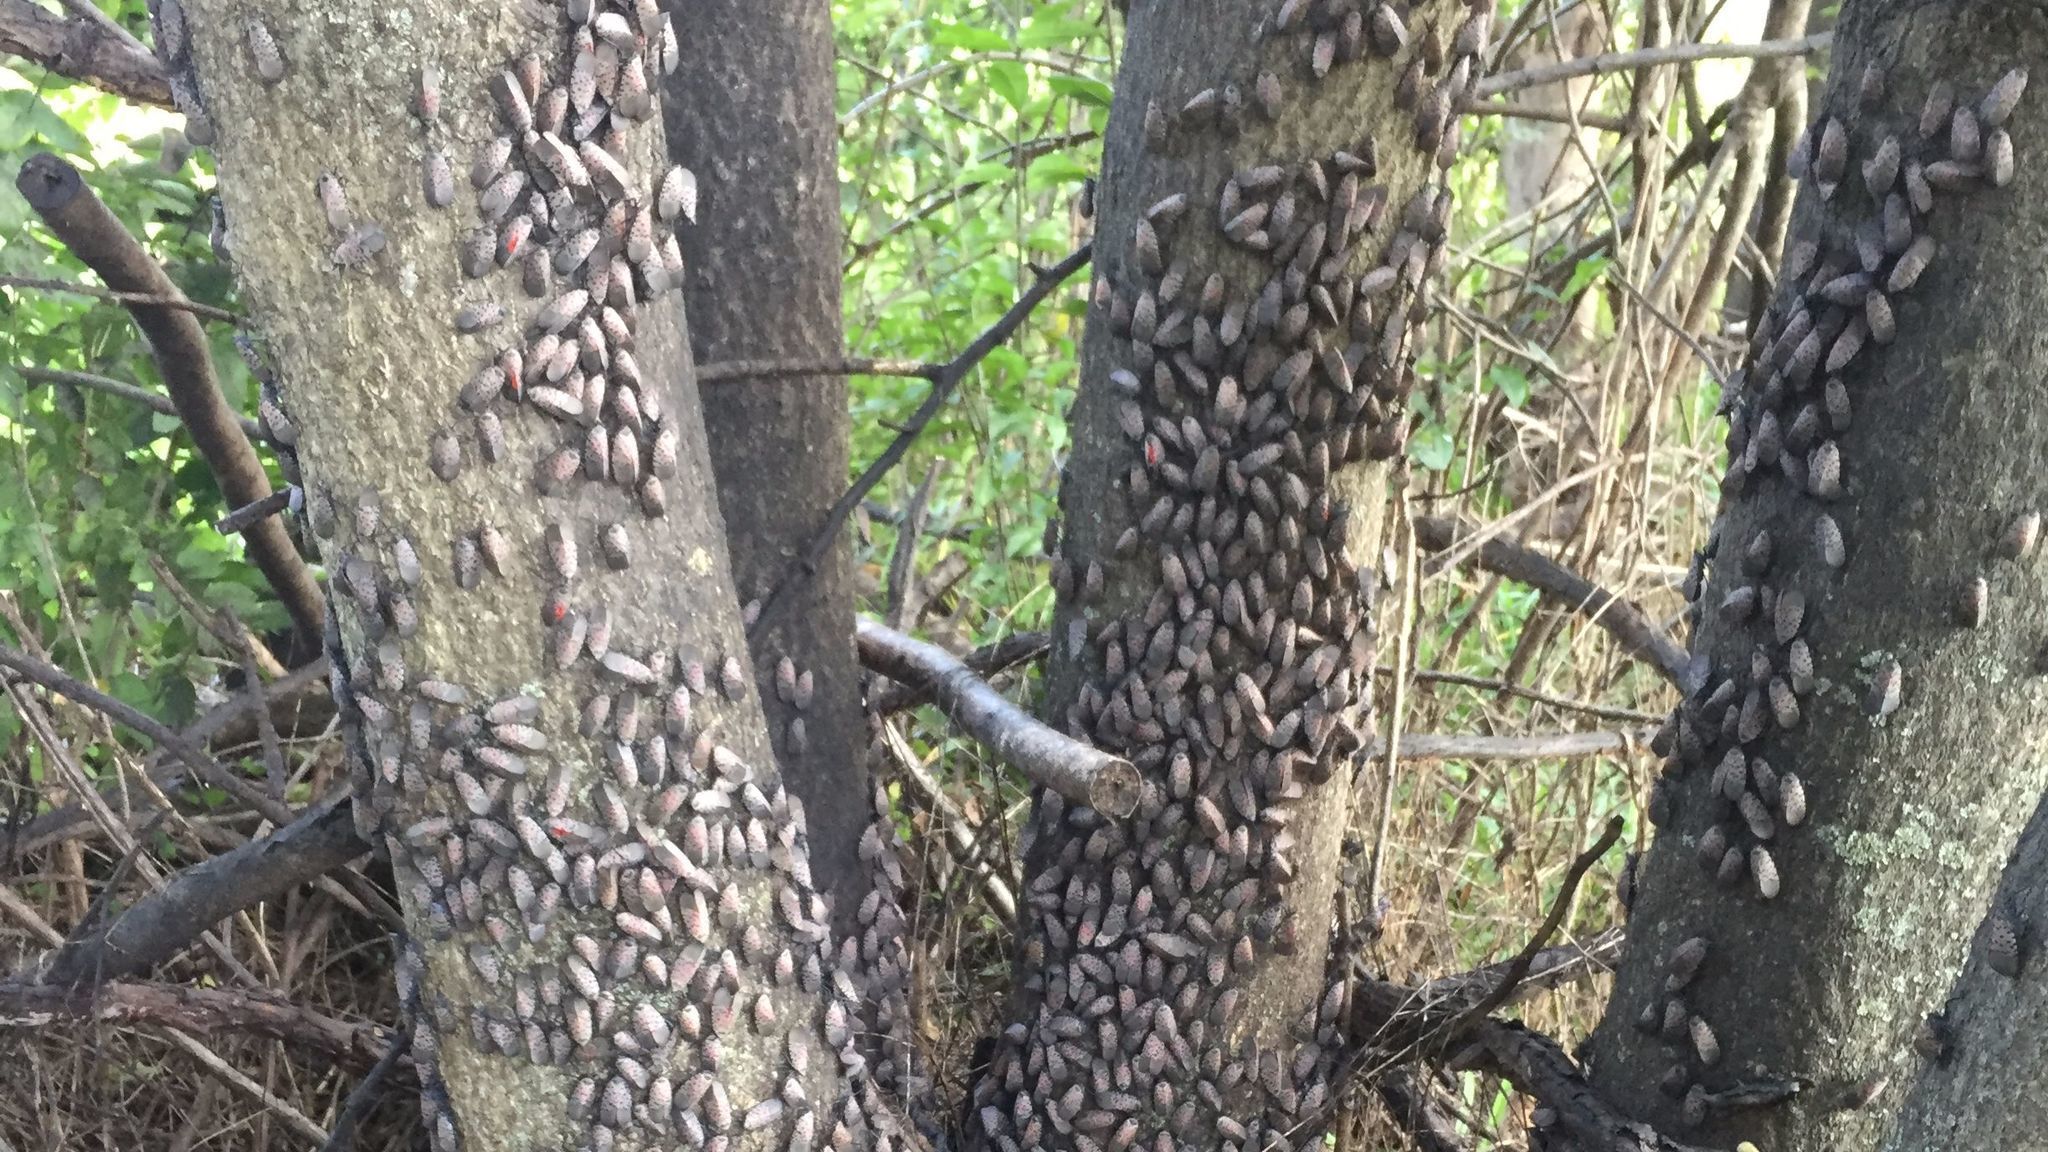 Photo of trees overrun by spotted lanternflies